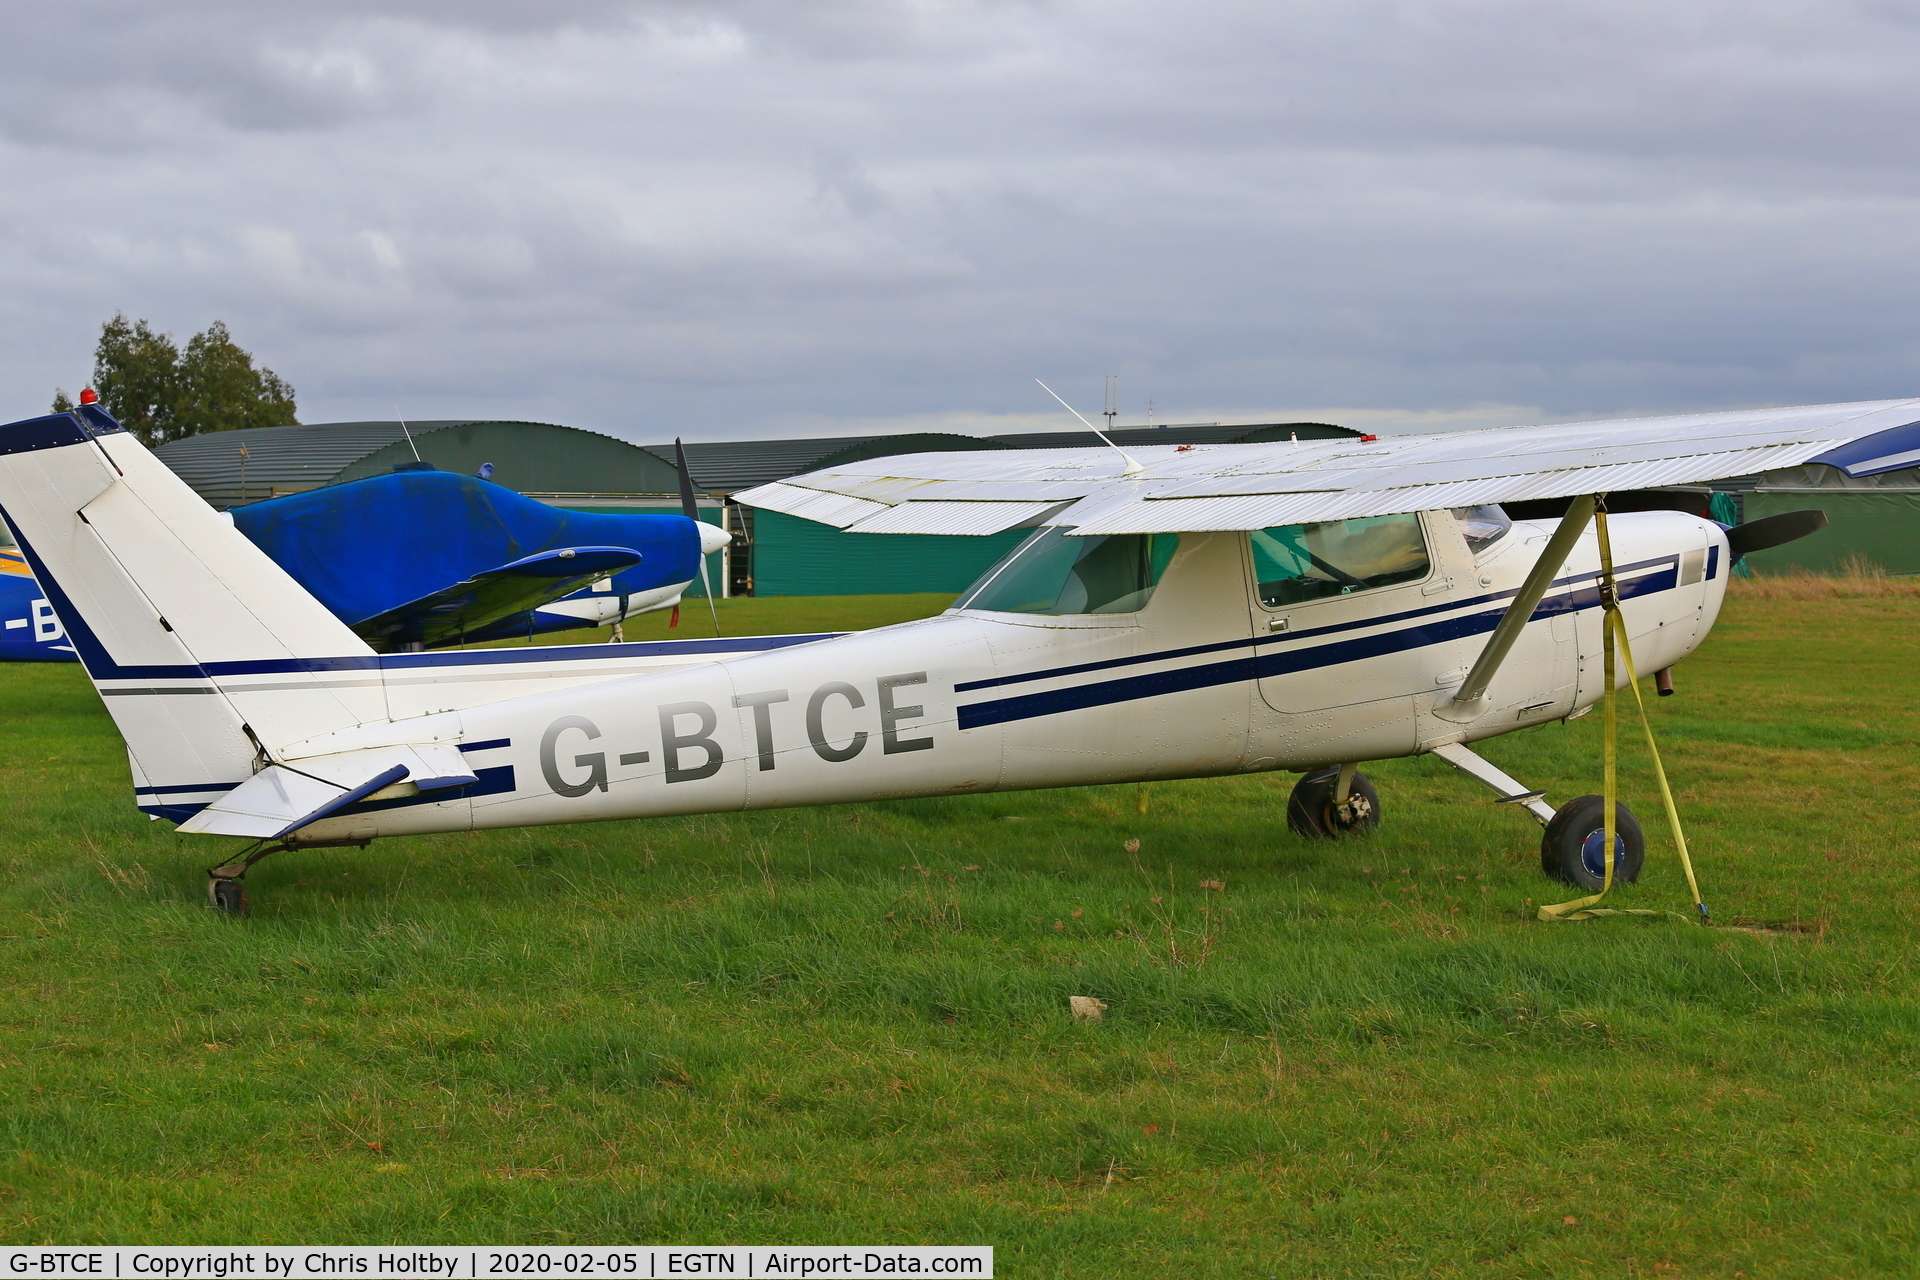 G-BTCE, 1978 Cessna 152 C/N 152-81376, Parked at Enstone Airfield Oxon